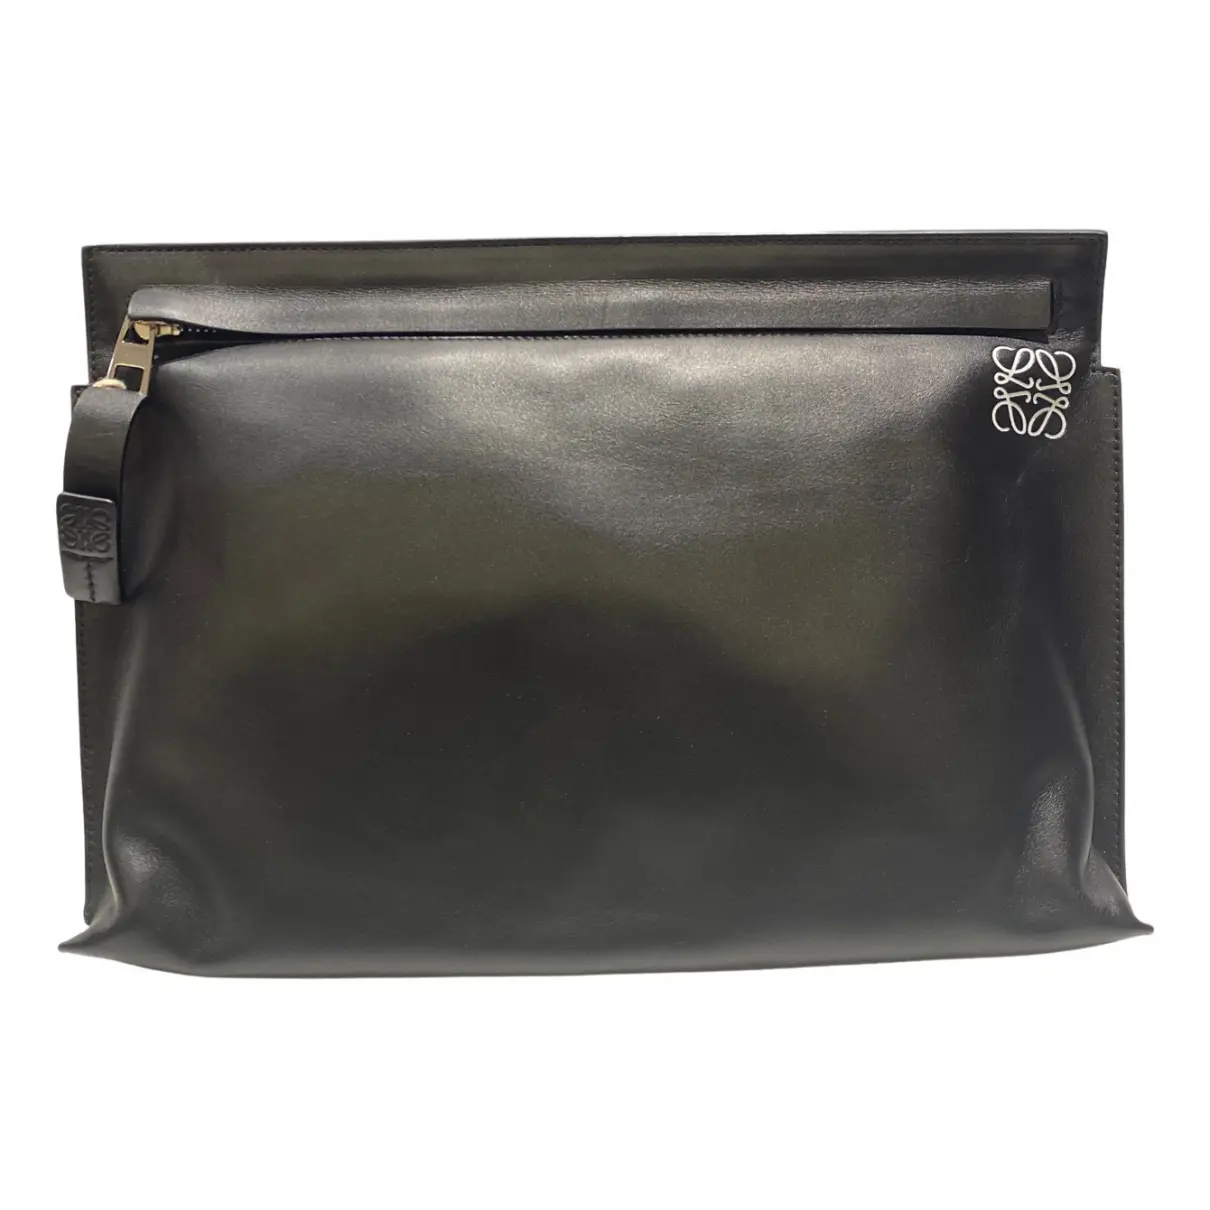 T Pouch leather clutch bag Loewe